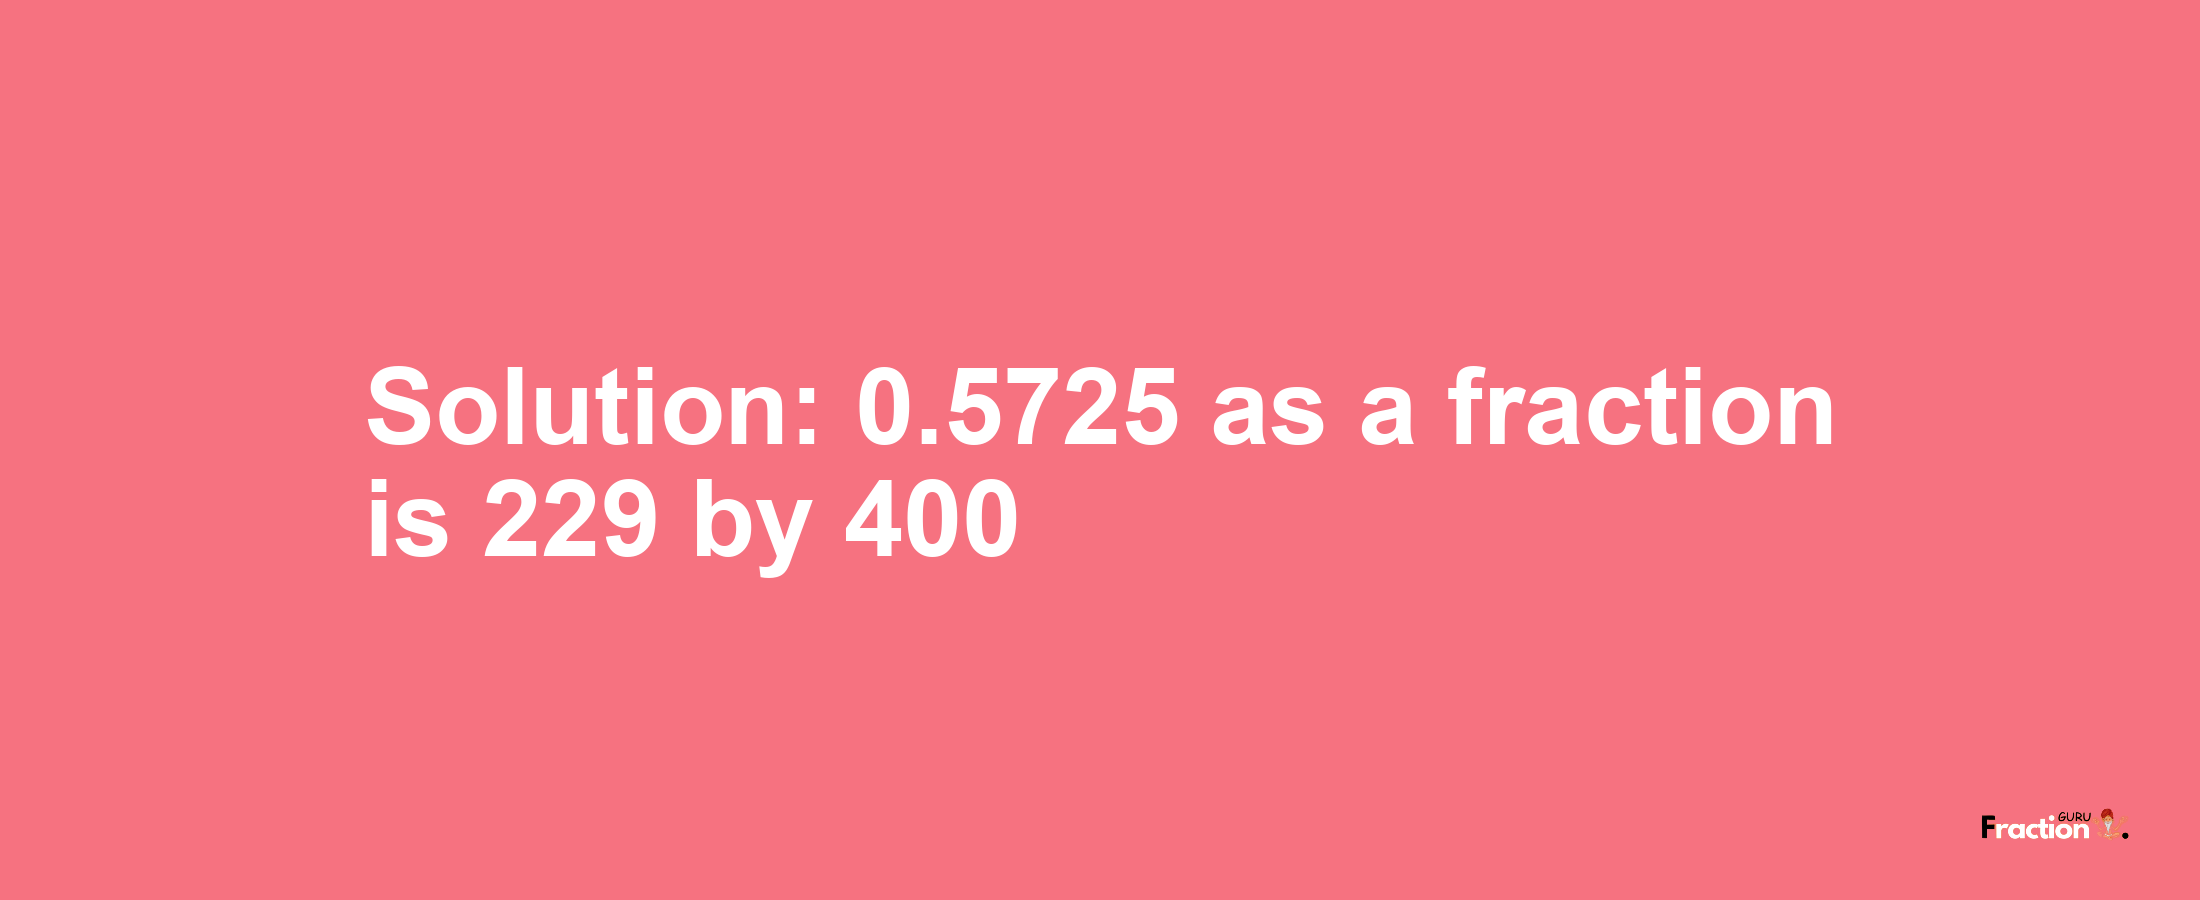 Solution:0.5725 as a fraction is 229/400